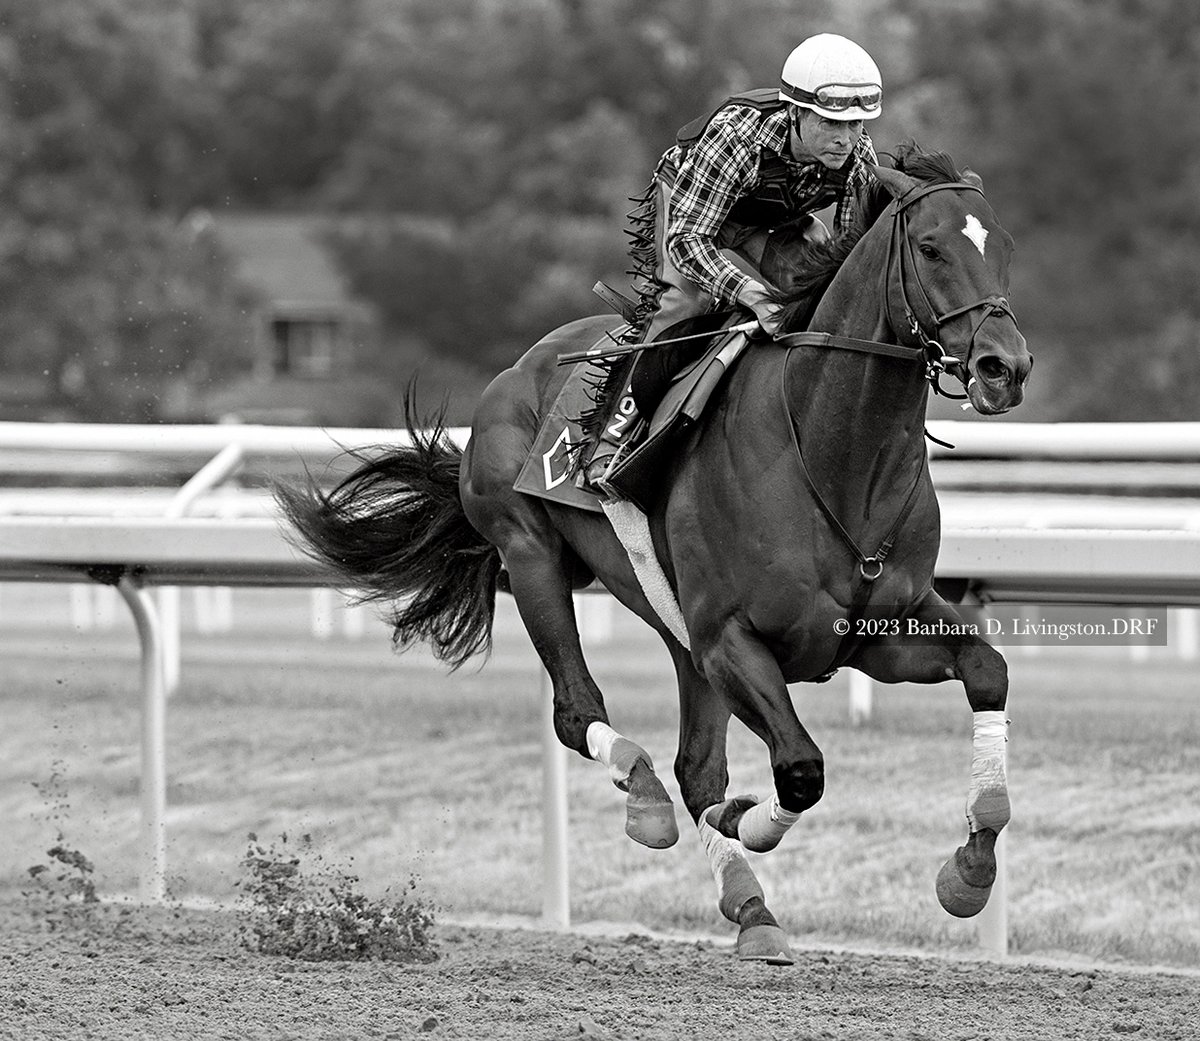 CODY'S WISH (Curlin - Dance Card, by Tapit) worked over Saratoga's Oklahoma track this morning. With Neil Poznansky up, the Bill Mott trainee went 4 furlongs in a bullet 46.83. CODY'S WISH most recently won the Grade 1 Churchill Downs Stakes on May 6. He's looking great!